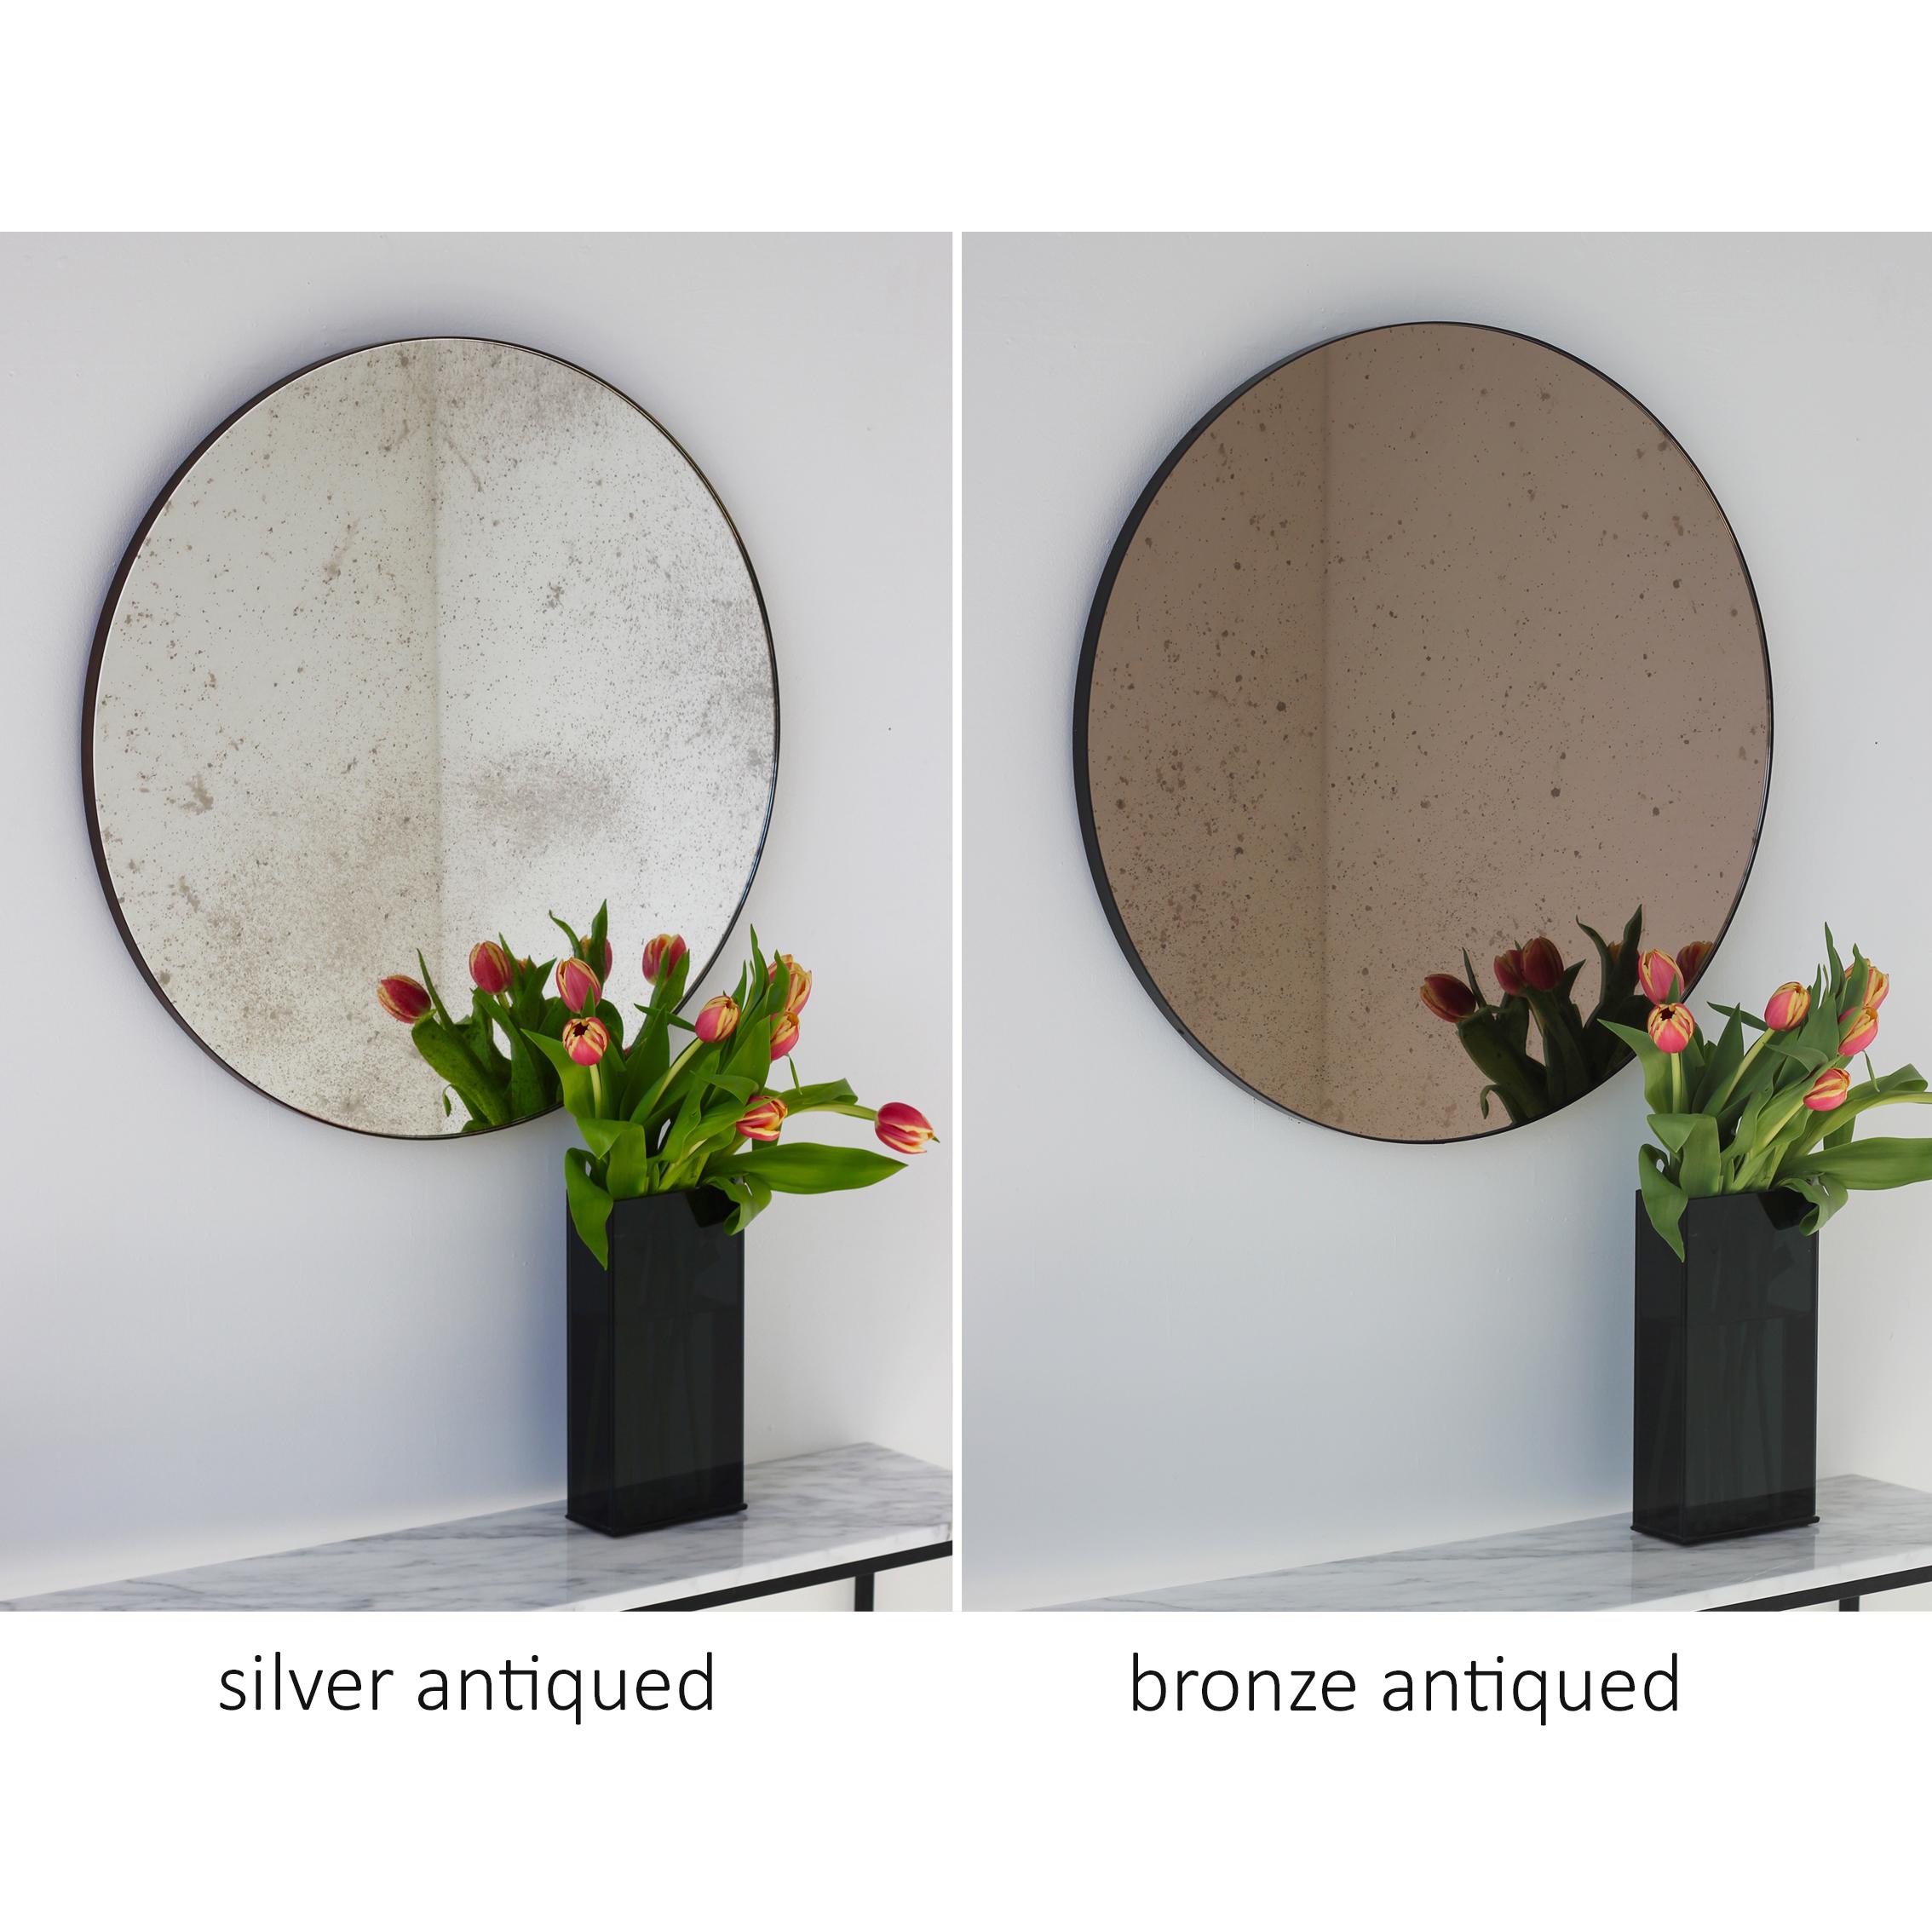 Aluminum Orbis Antiqued Bronze Tinted Modernist Round Mirror with Black Frame, Large For Sale